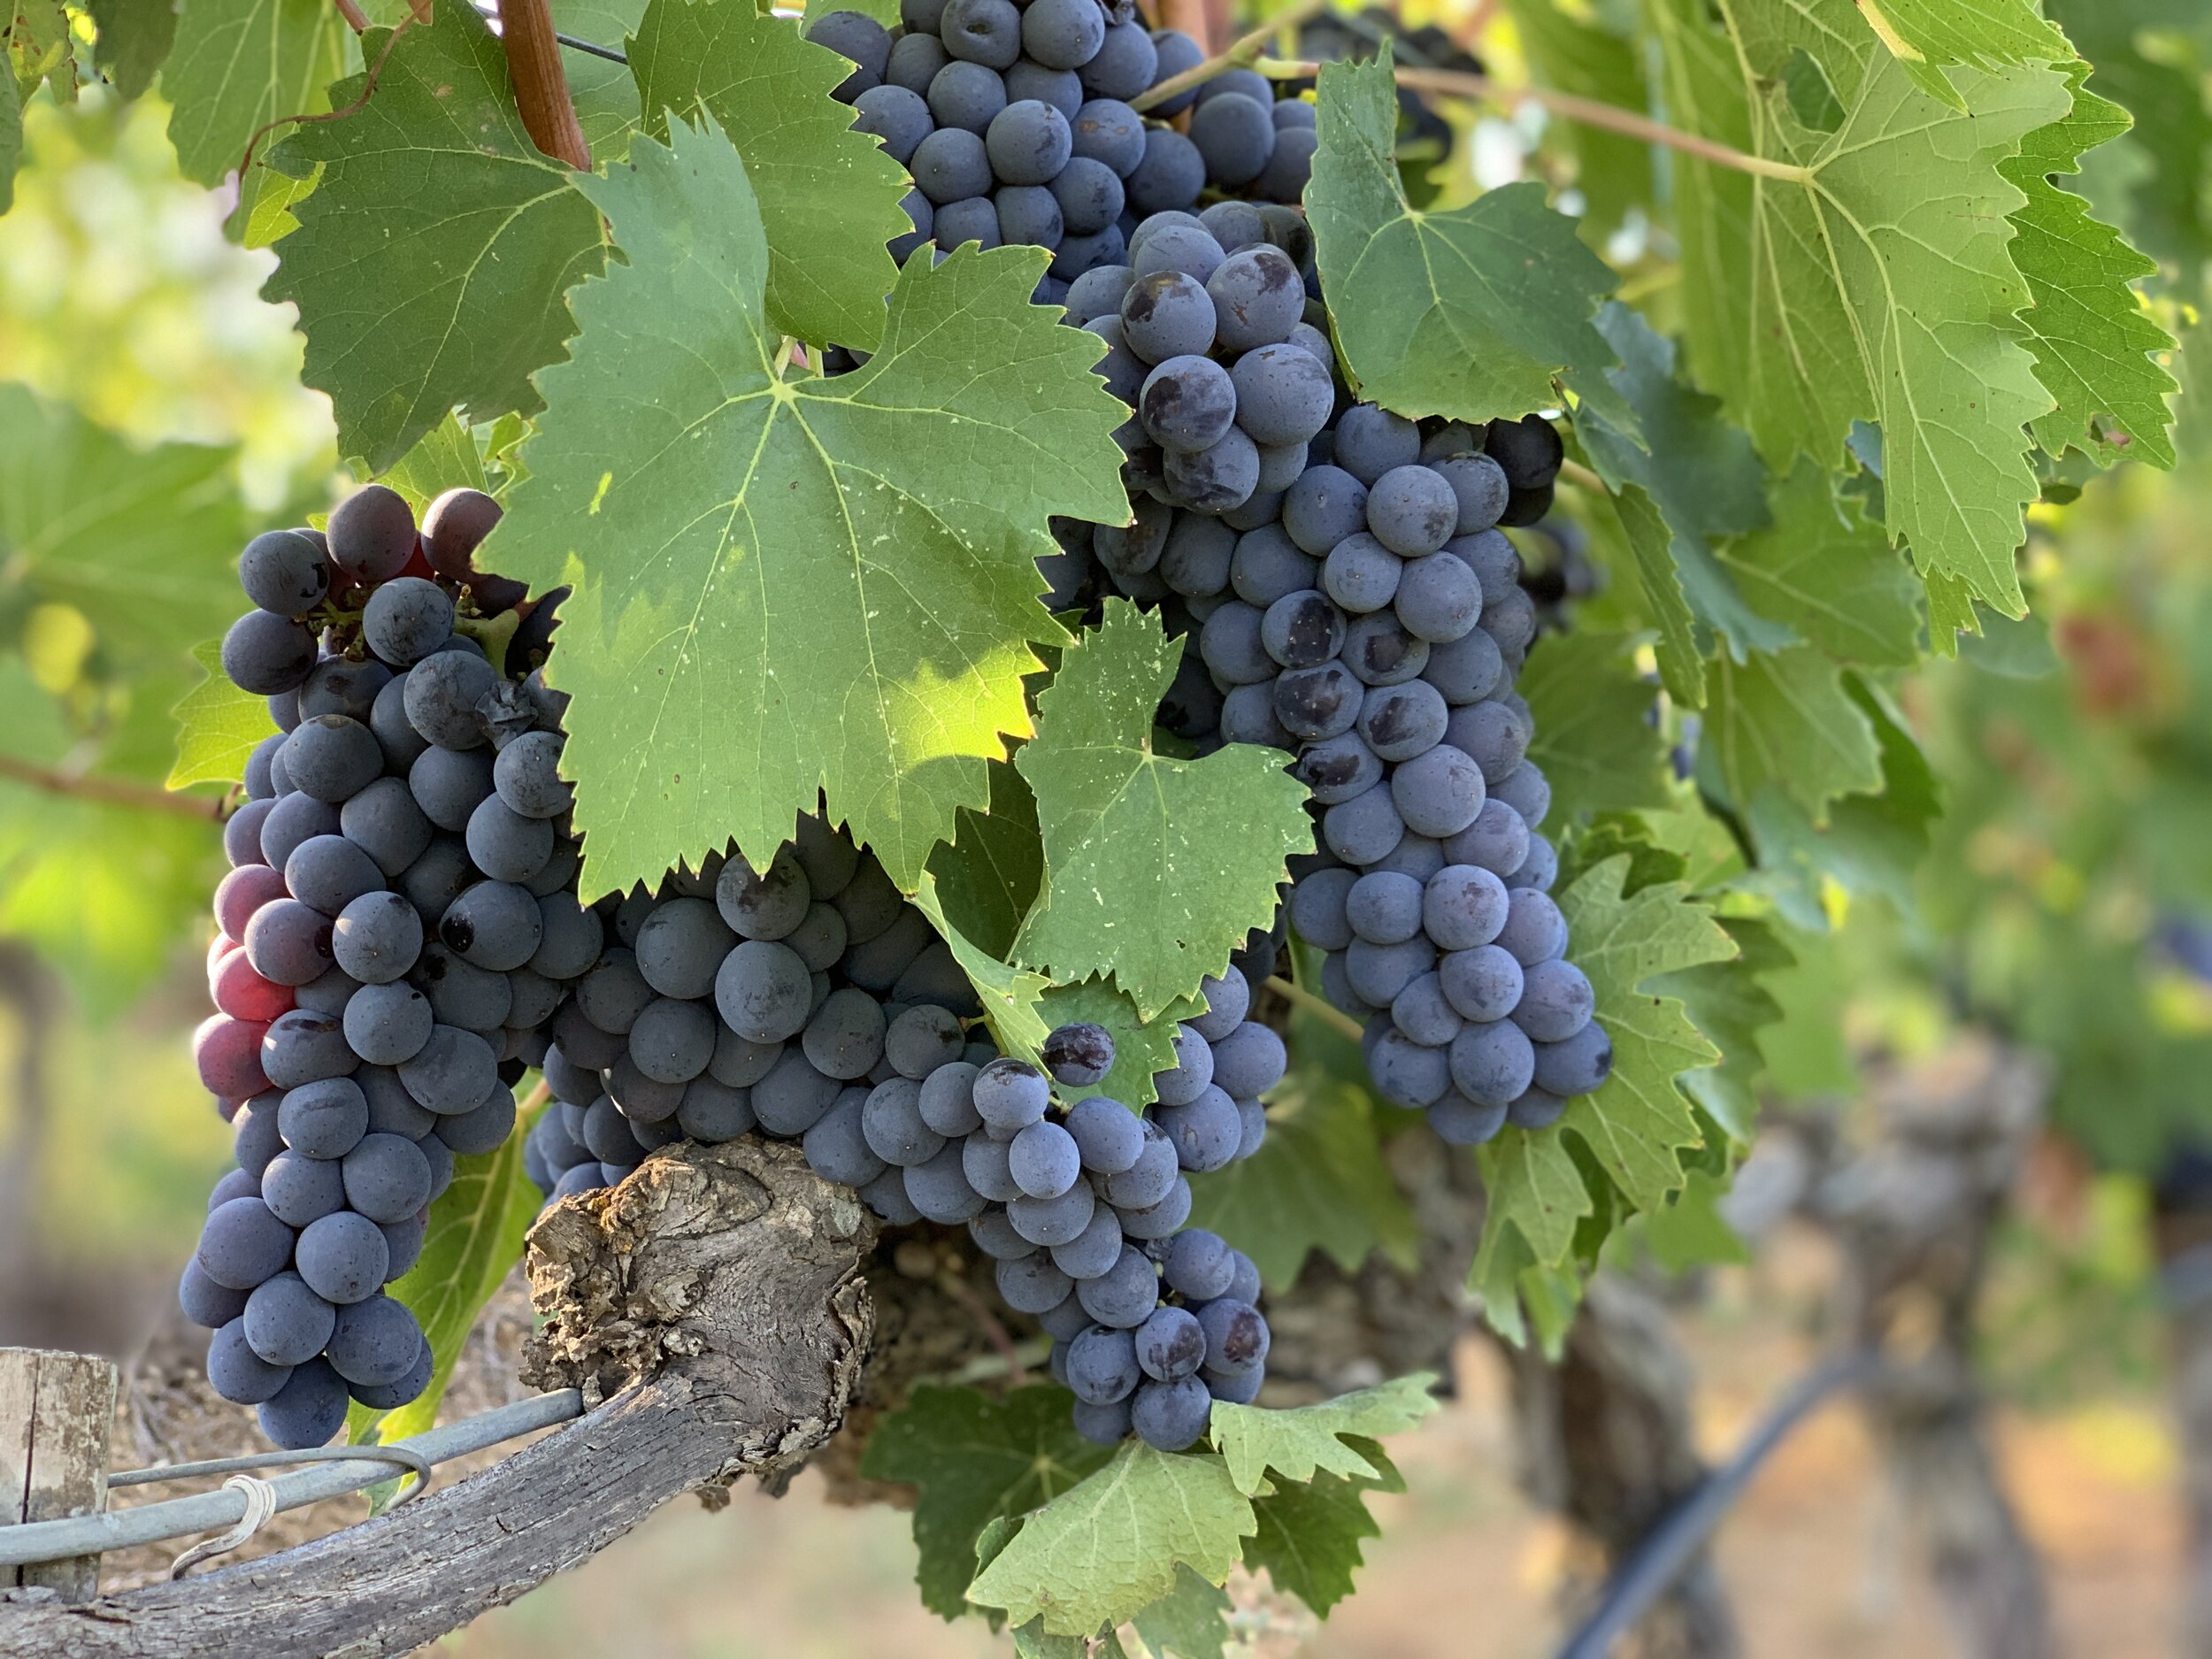 Grape Seed Extract Is a Potent Natural Defense Against a Hallmark of Aging By Killing Senescent Cells